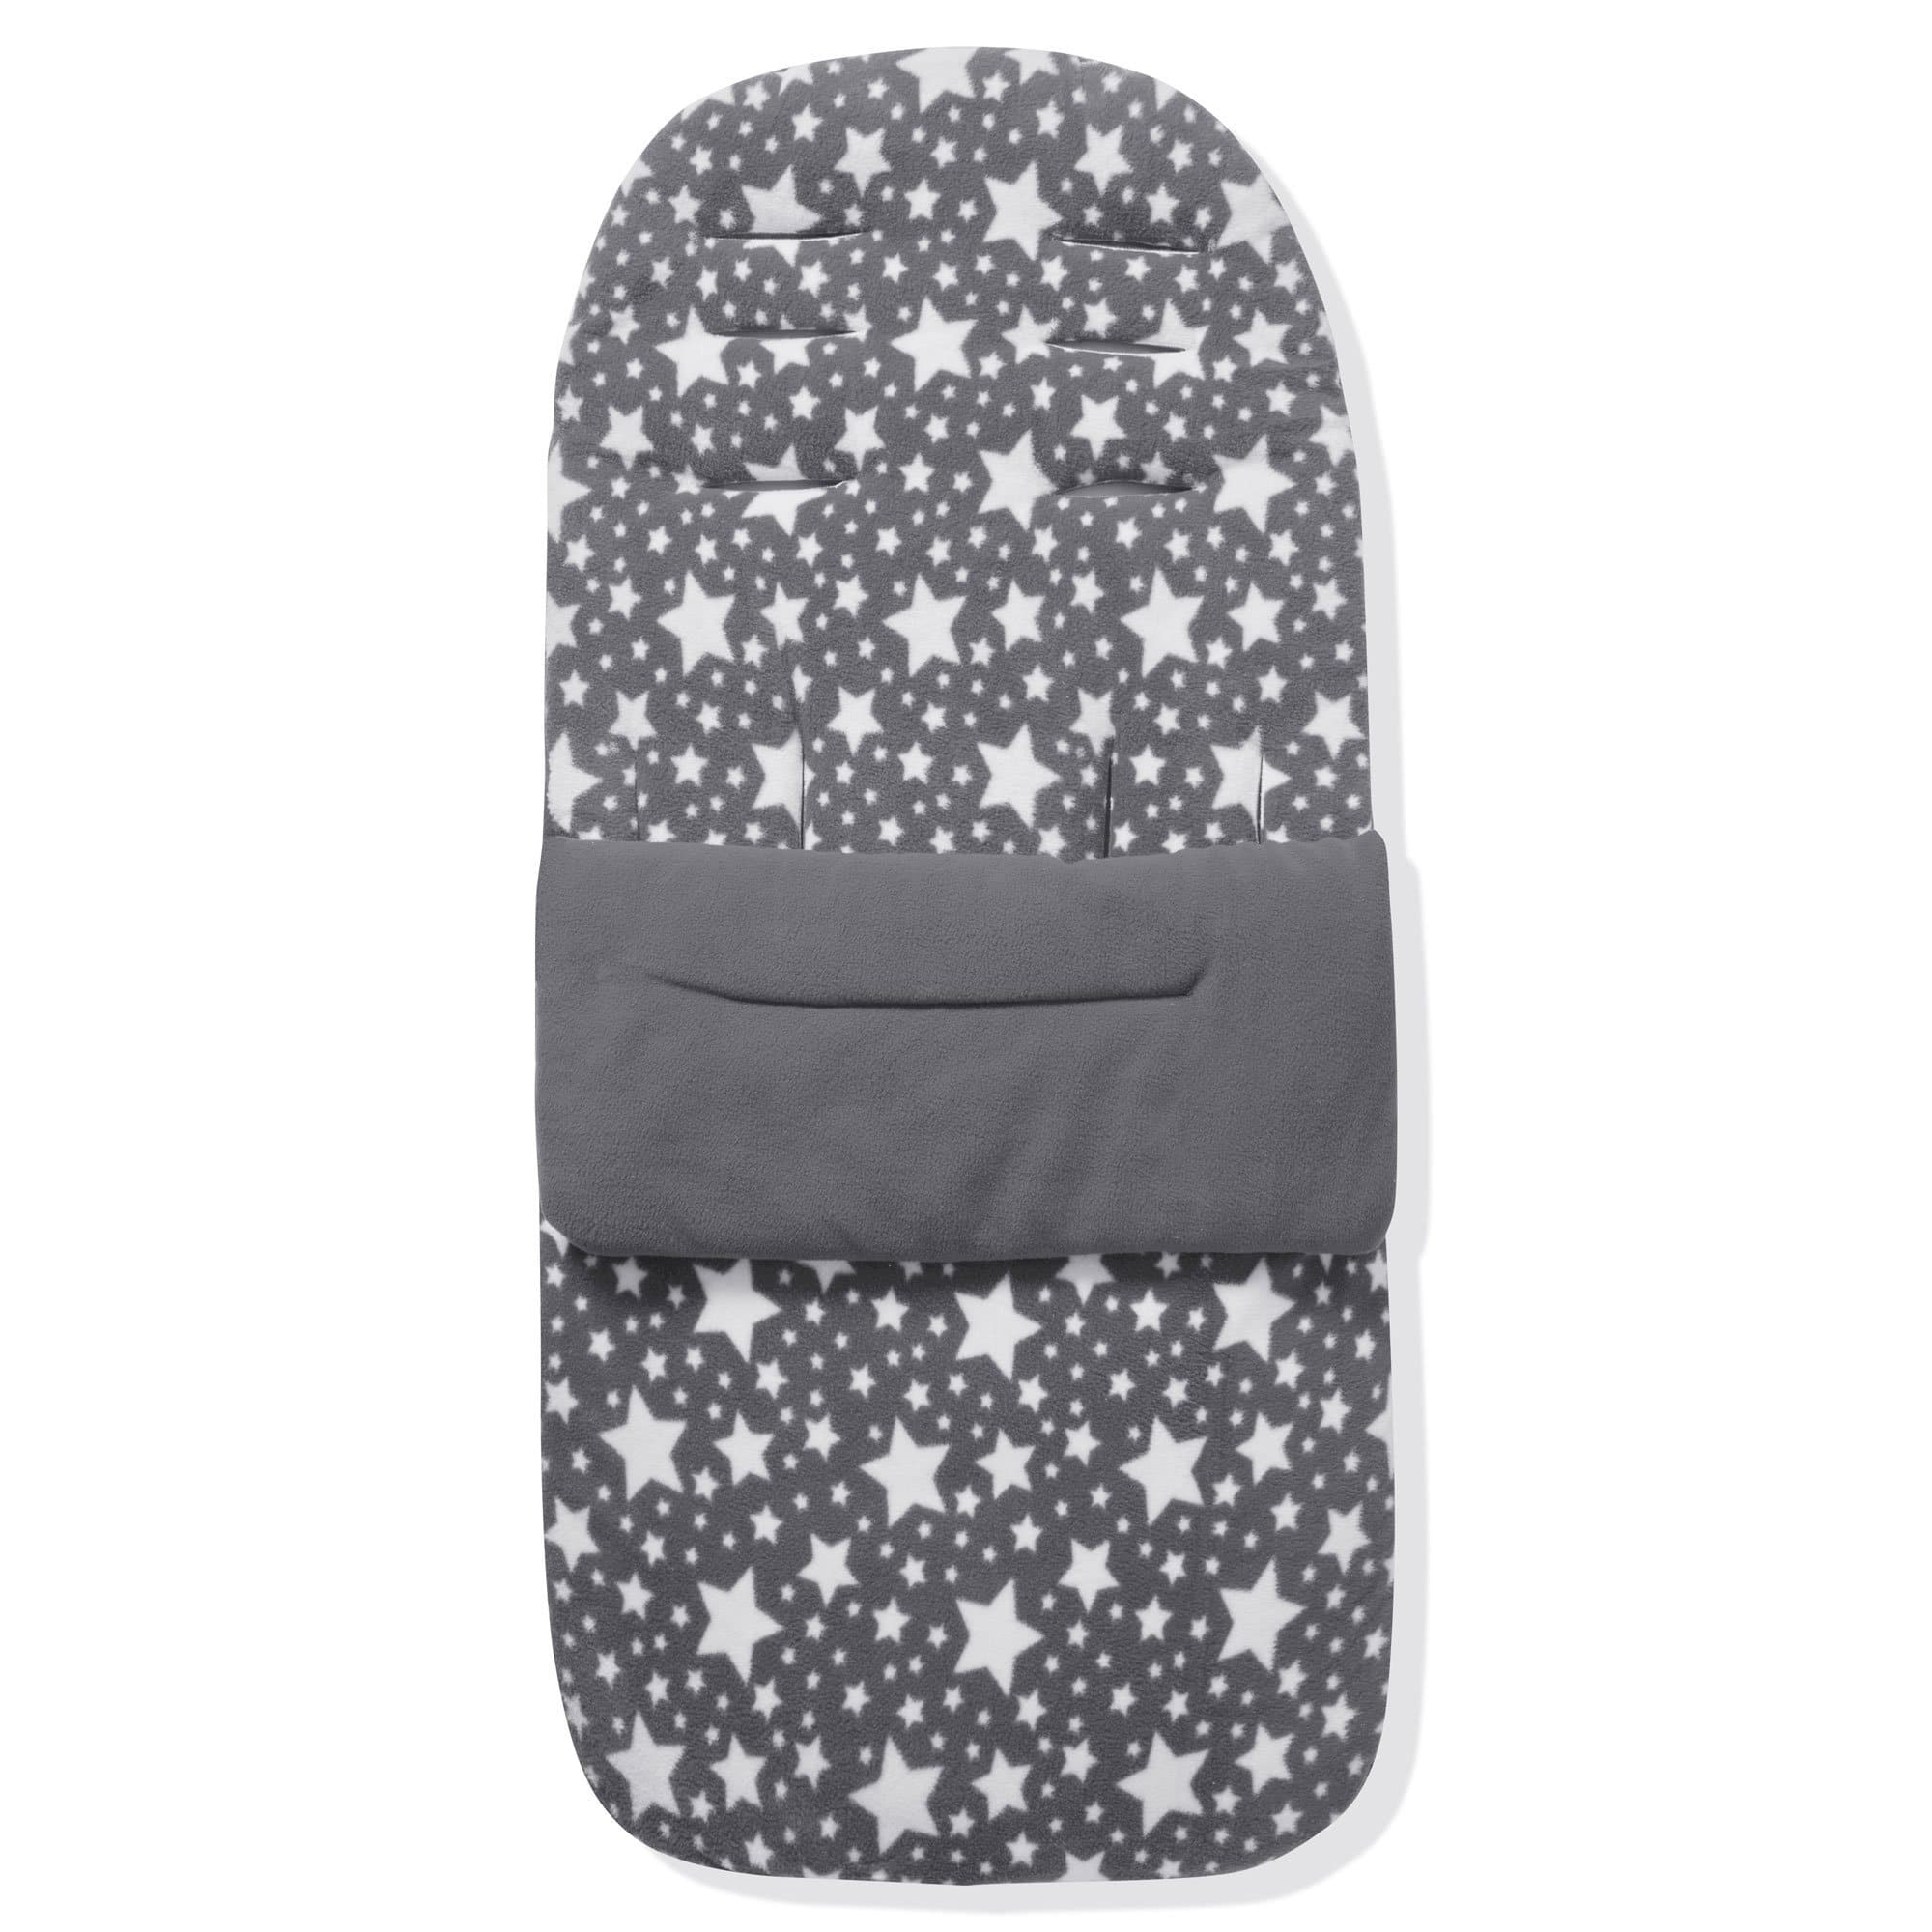 Fleece Footmuff / Cosy Toes Compatible with Venicci - Grey Star / Fits All Models | For Your Little One